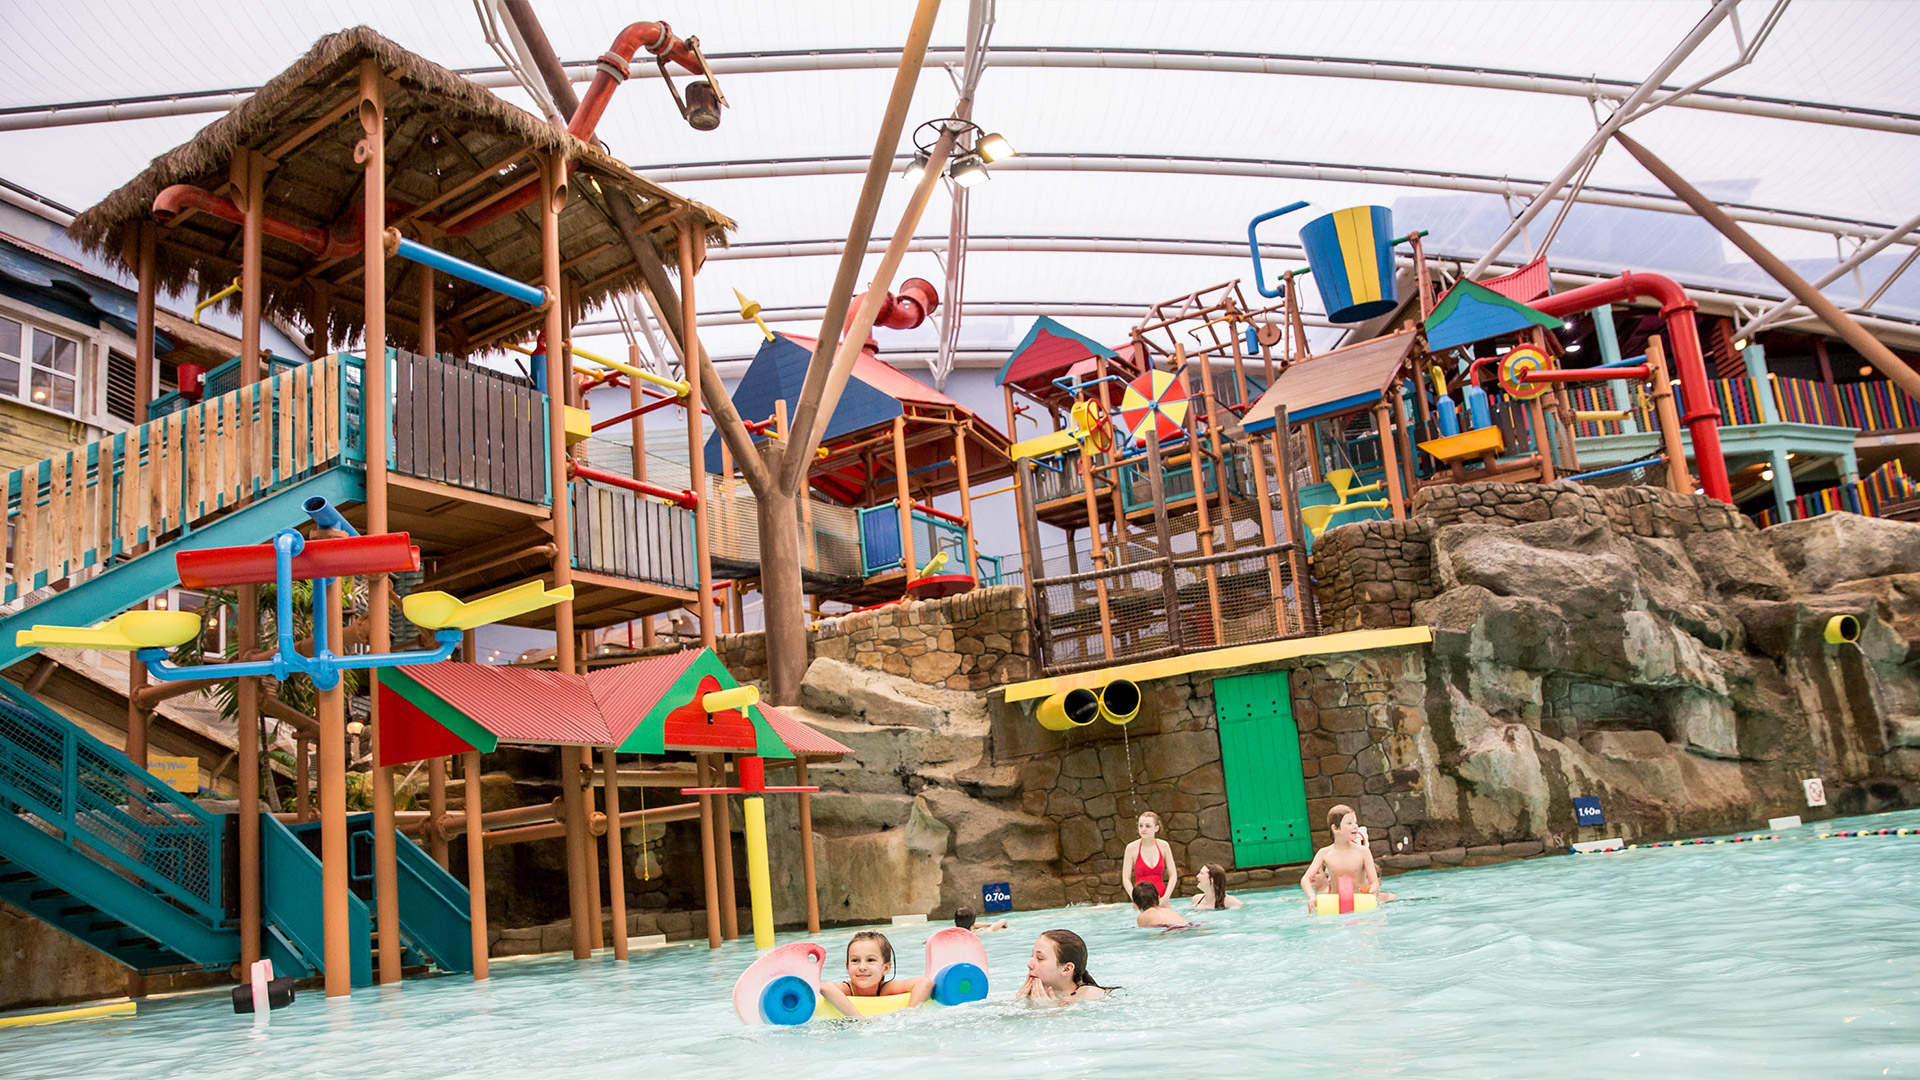 Skim-out – Alton Towers Waterpark